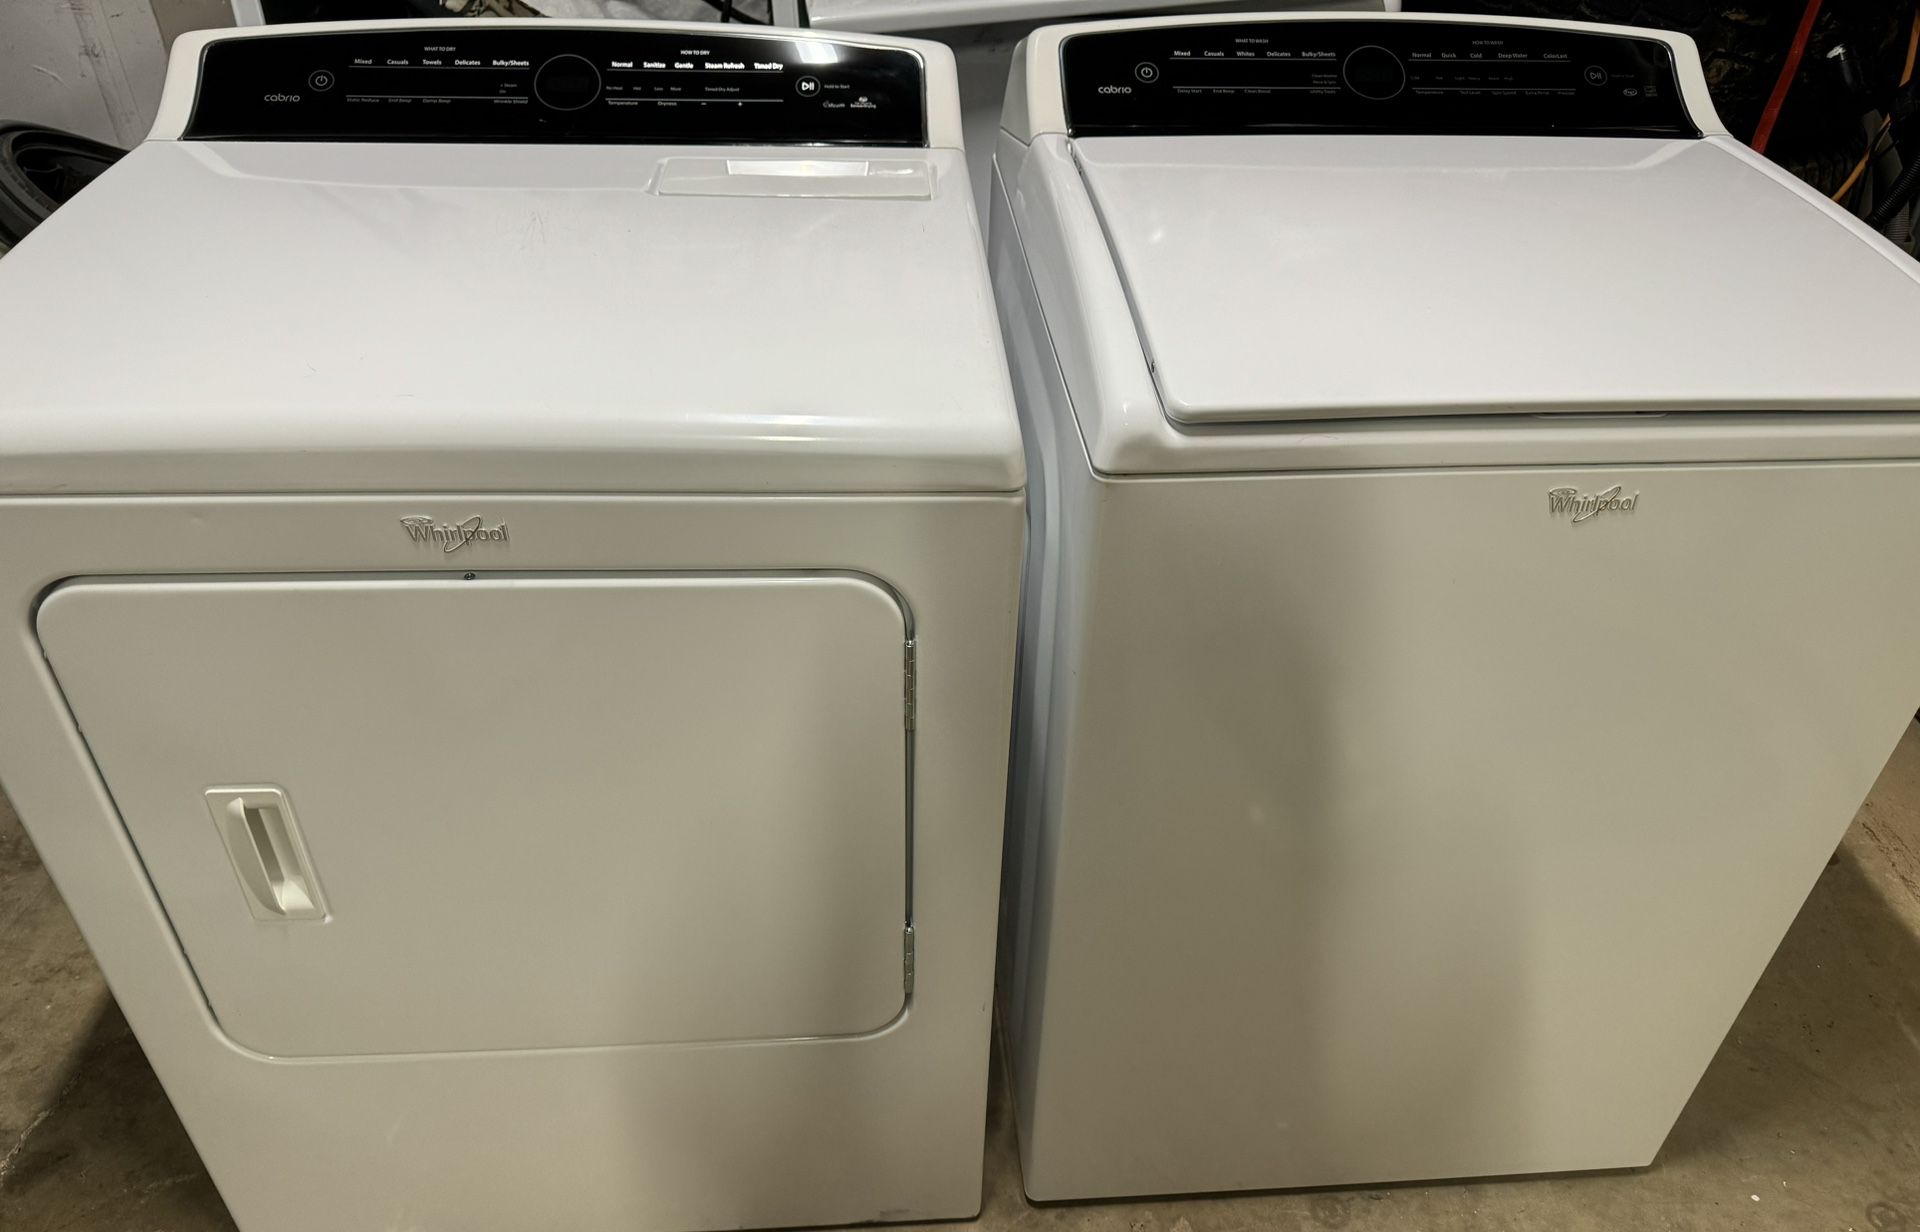 Whirlpool Cabrio Washer And Dryer Set